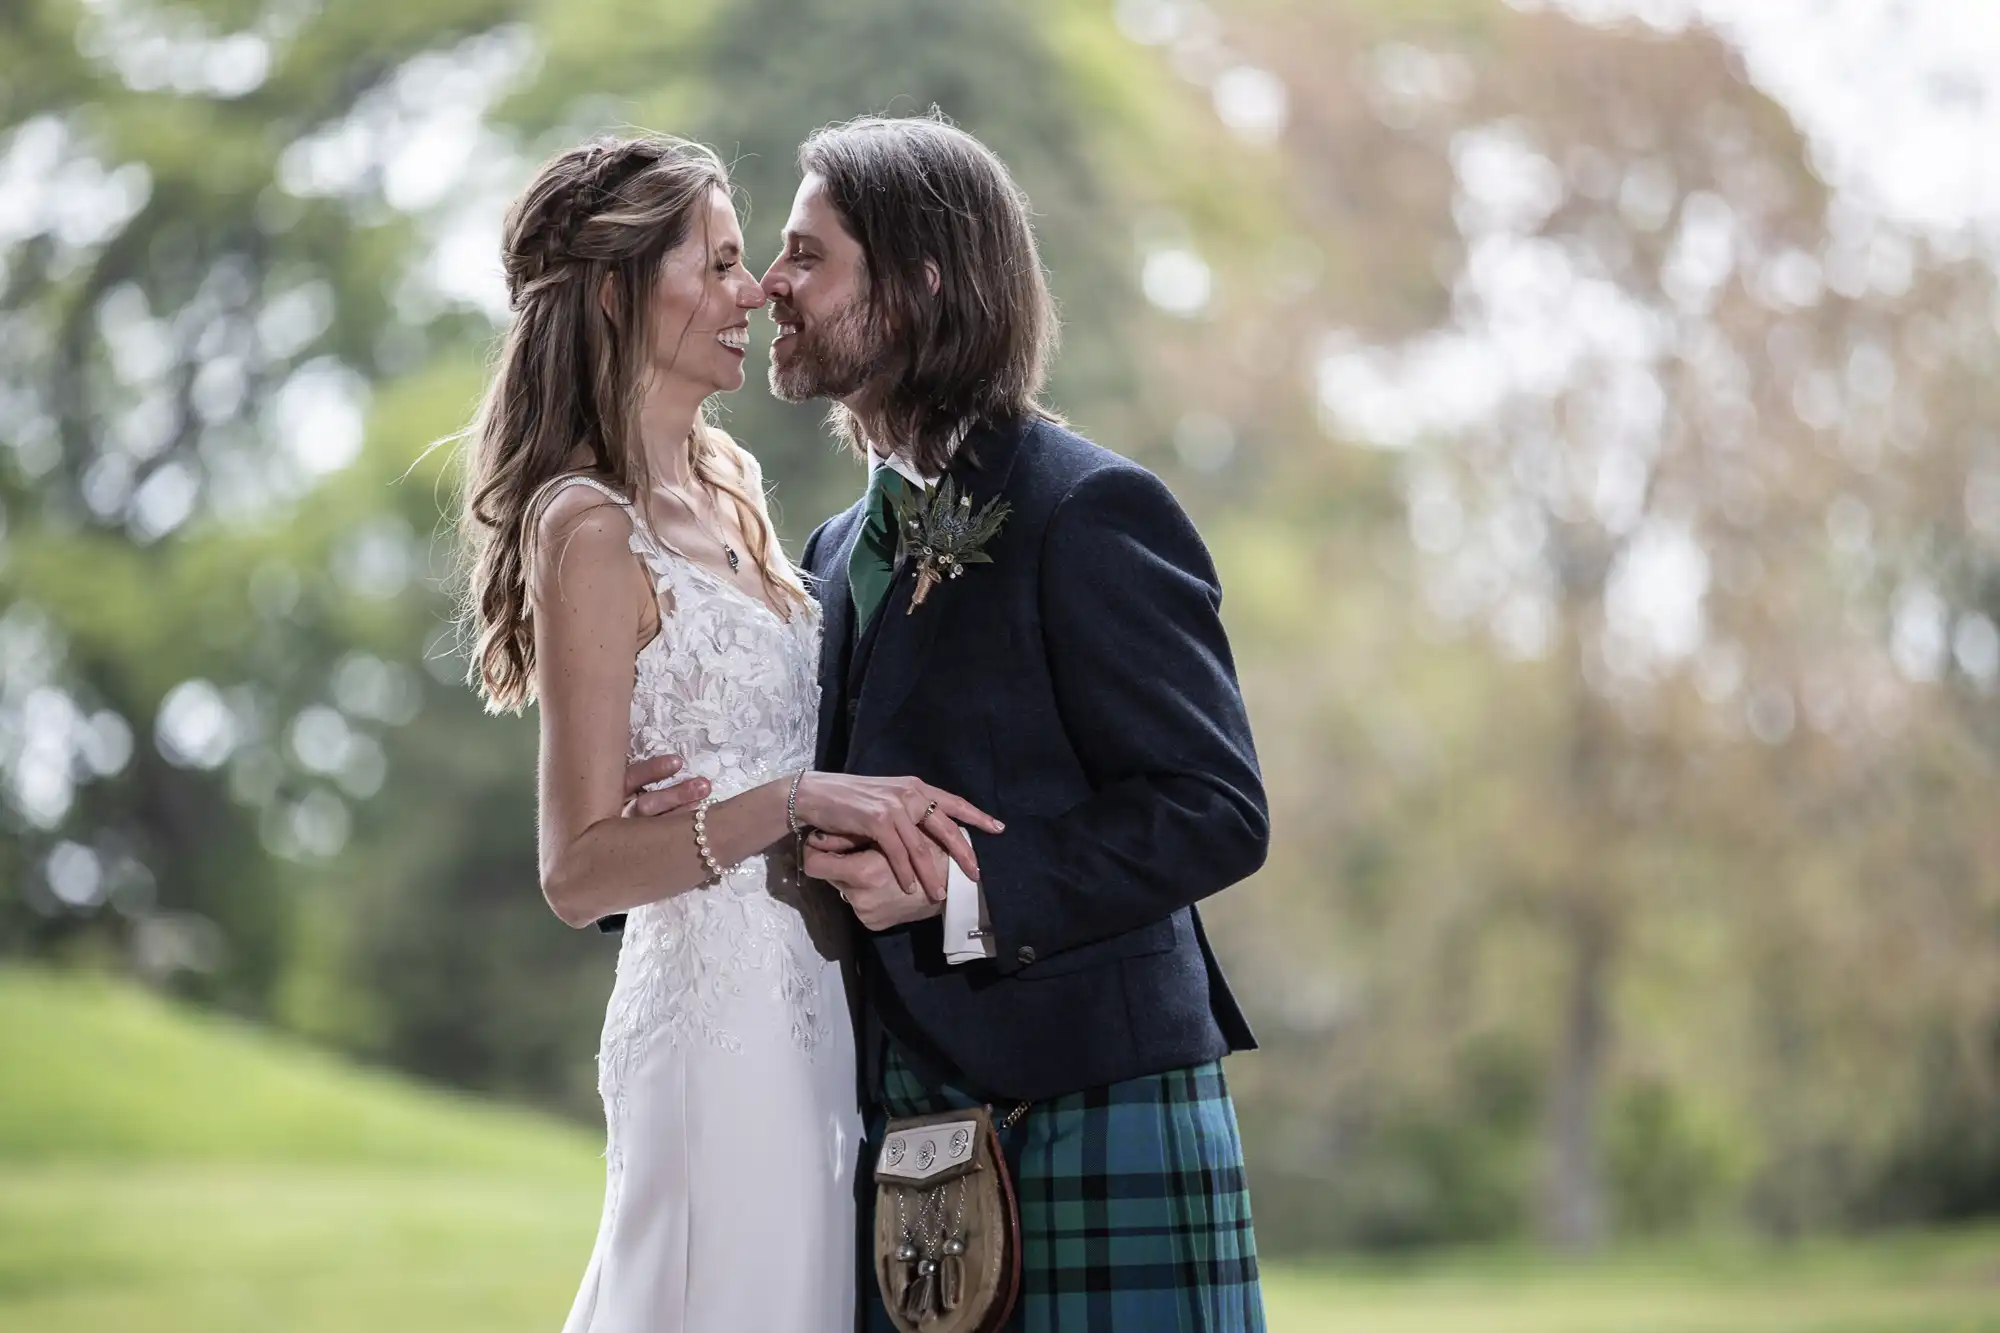 A bride and groom stand close, holding hands and smiling at each other. The groom wears a kilt, and the bride is in a white wedding dress. They are outdoors with greenery in the background.